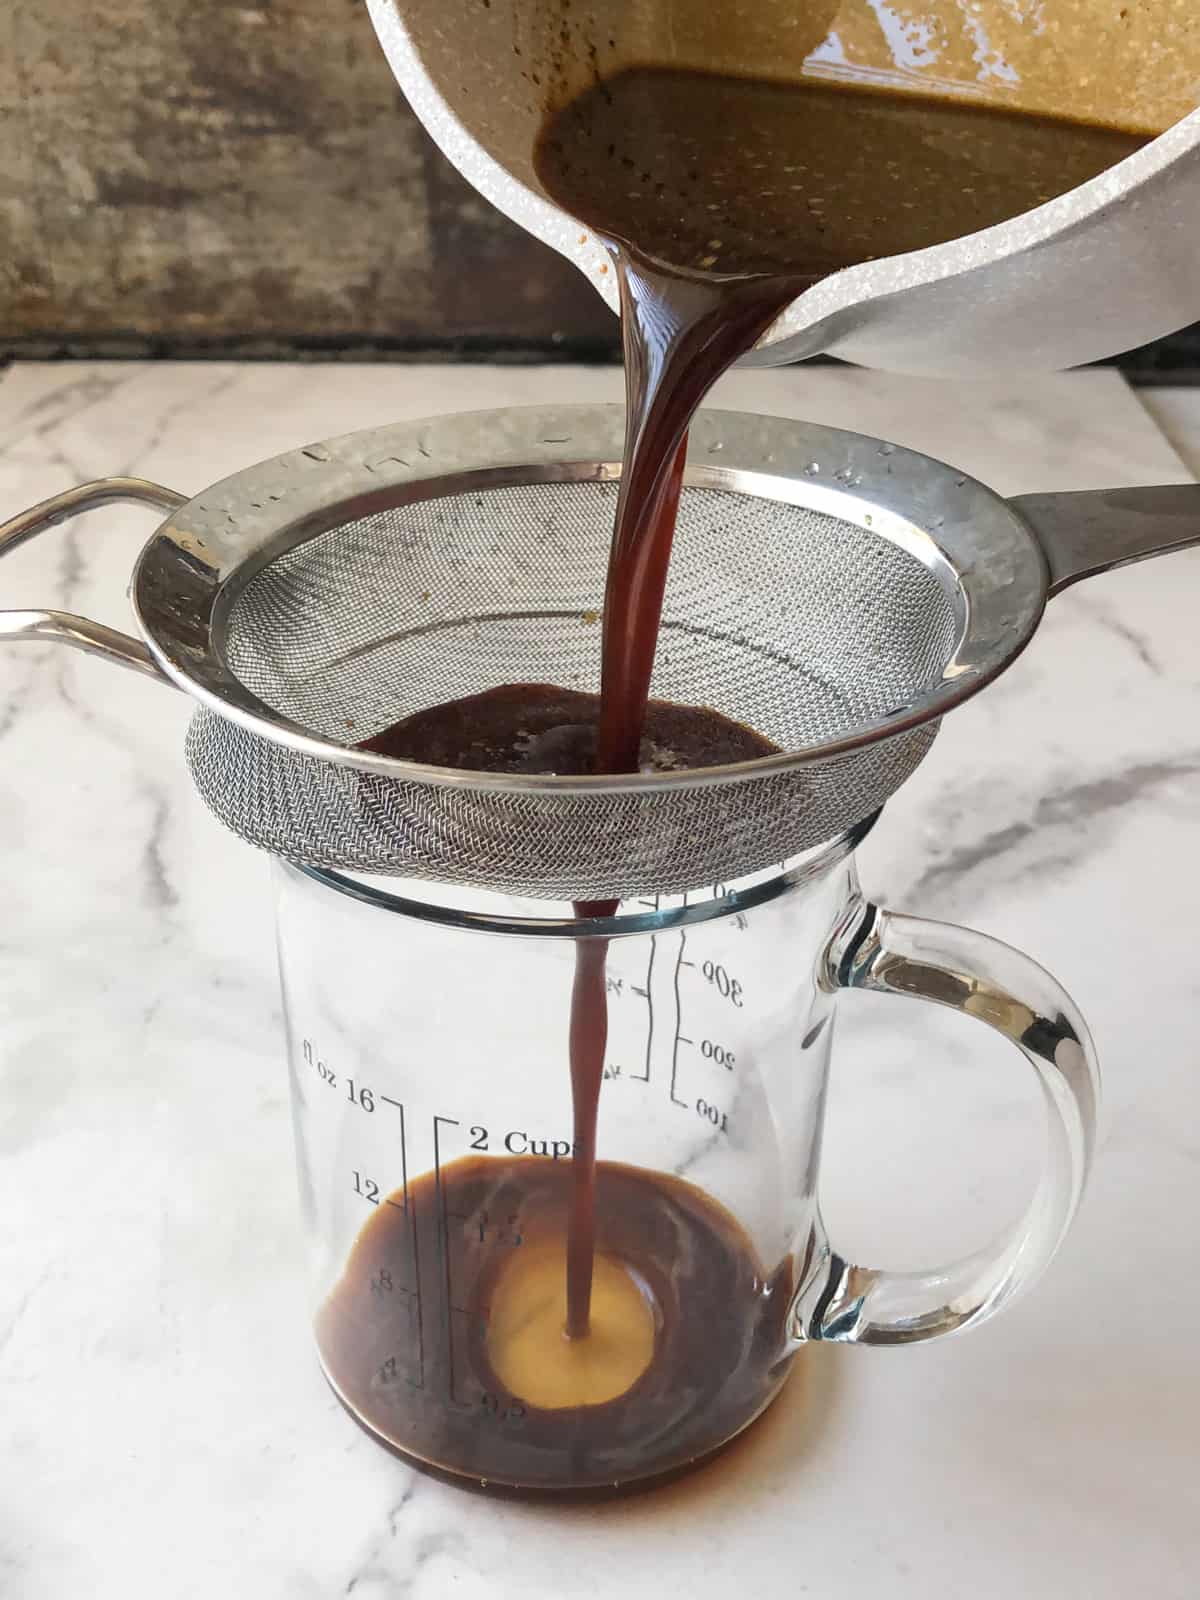 Worcestershire sauce being strained into a glass measuring cup.